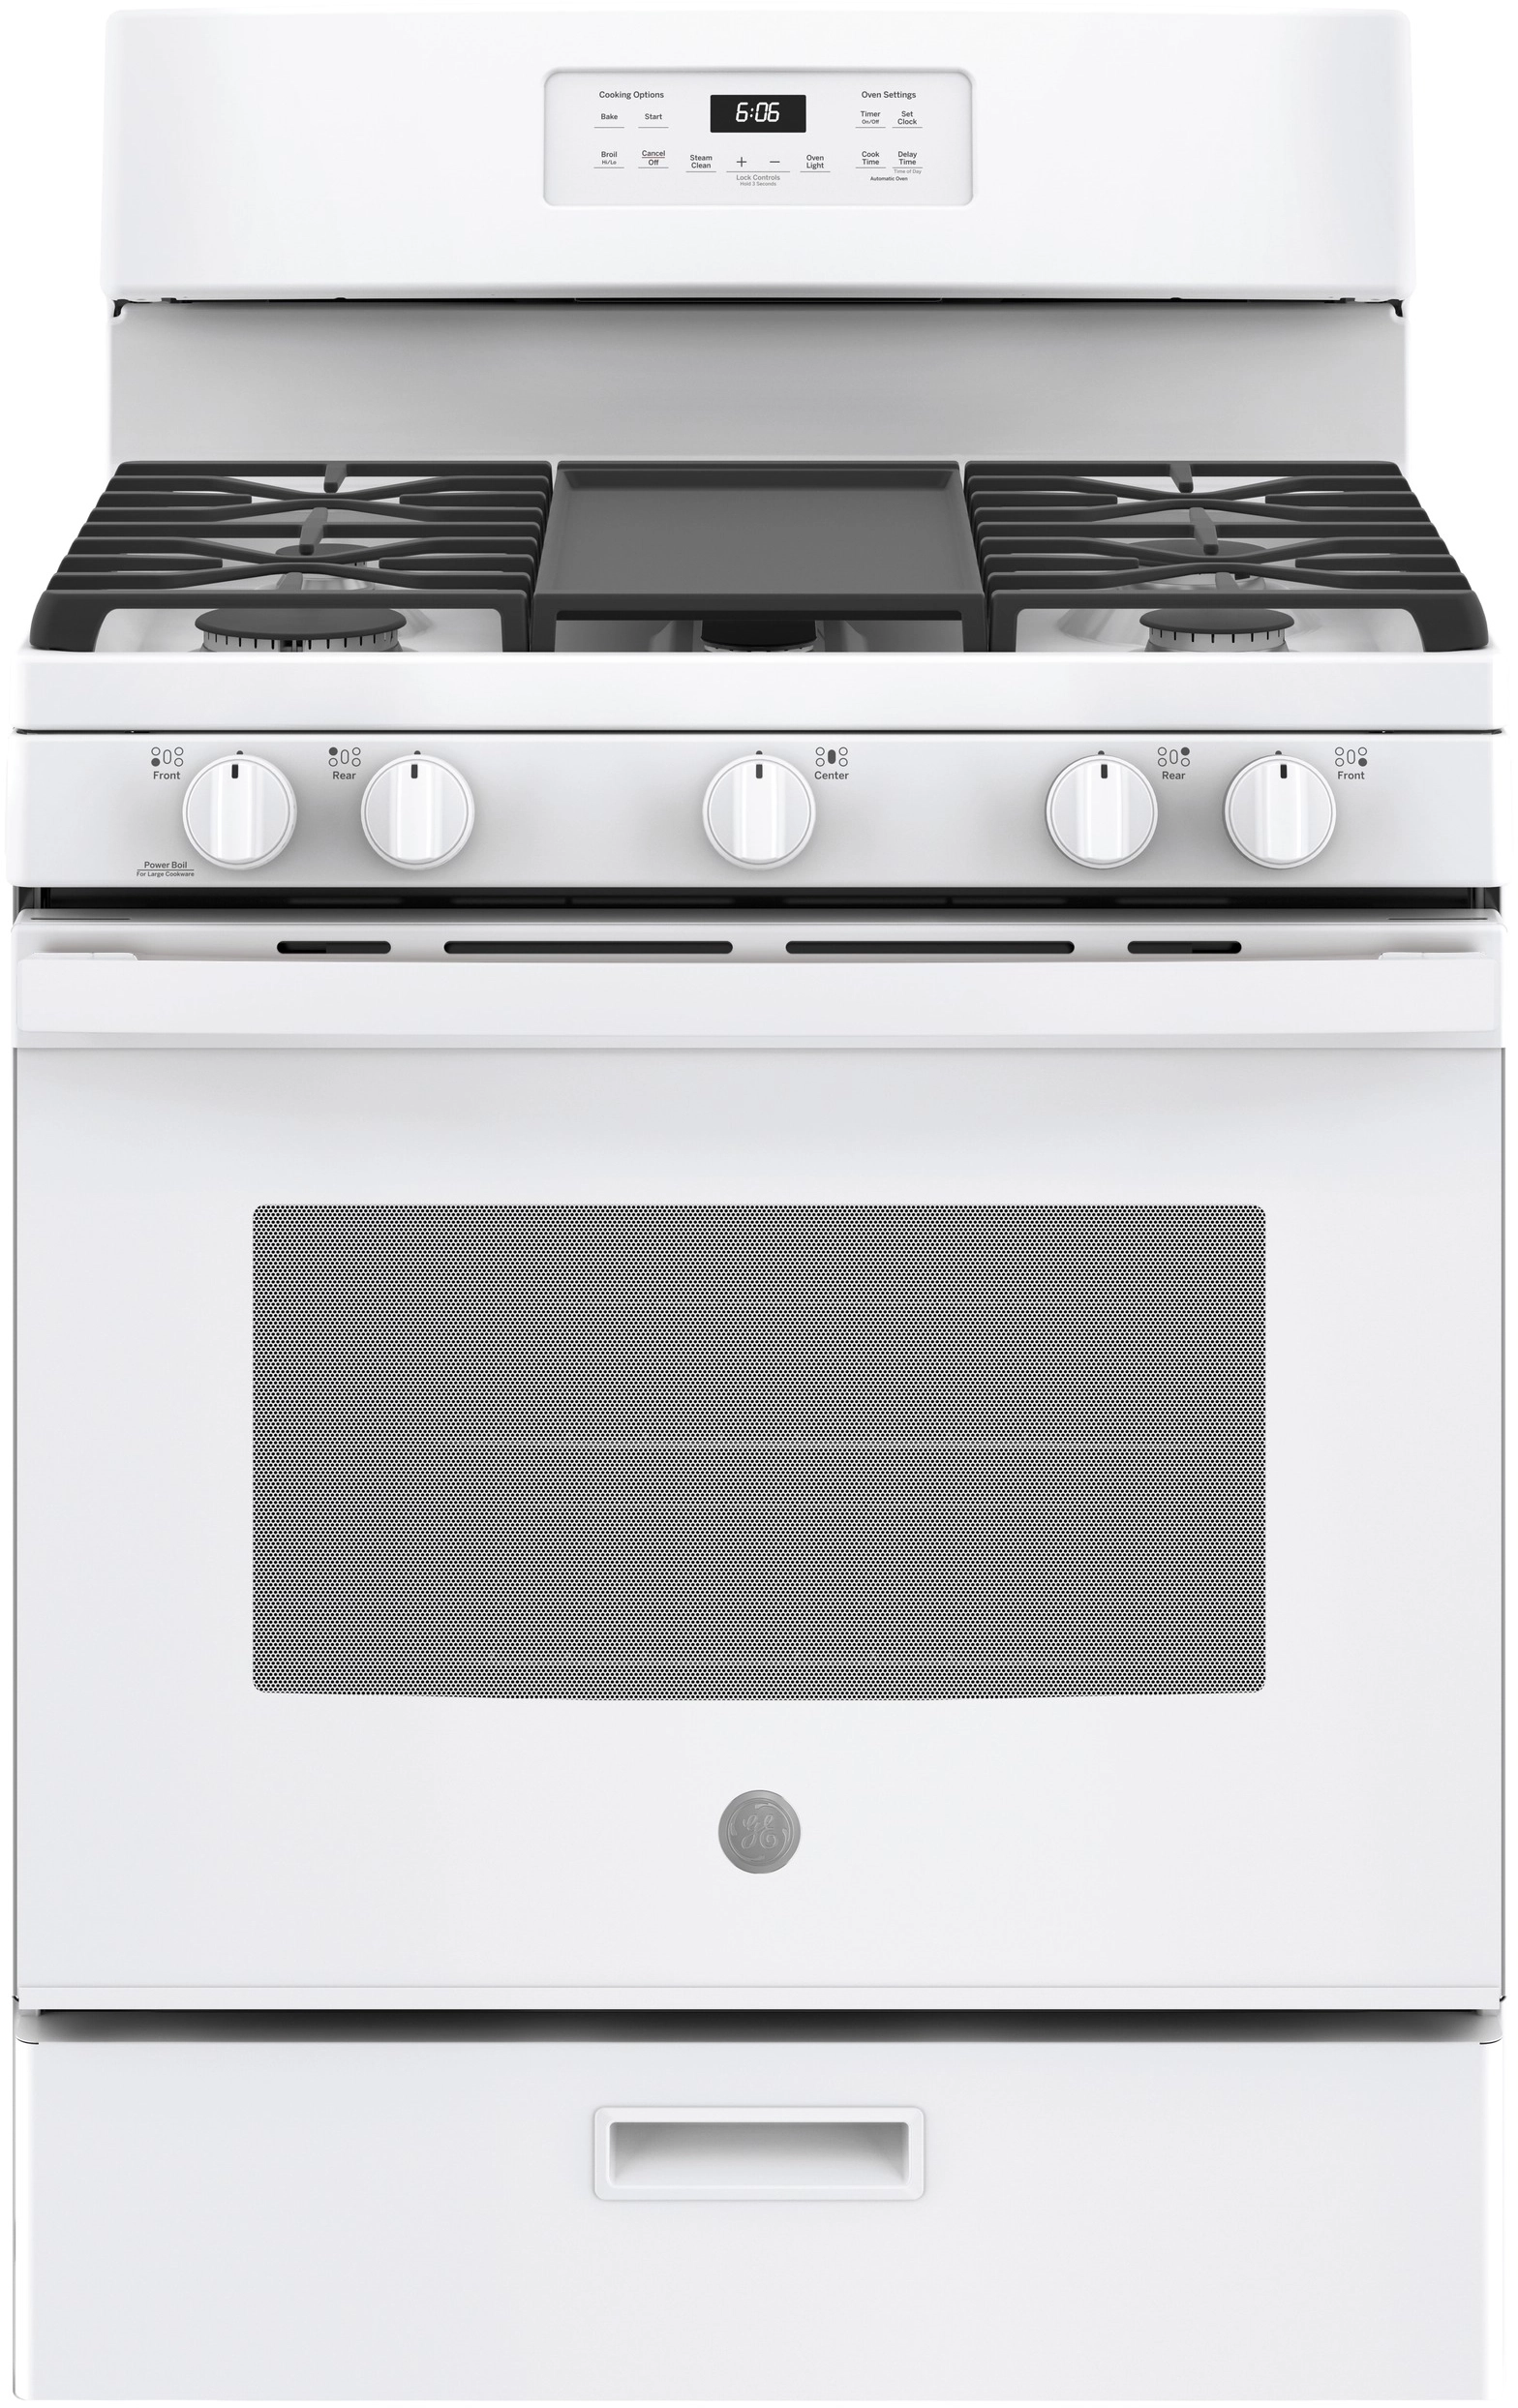 General Electric 30 Inch Freestanding Gas Range with 5 Sealed Burners